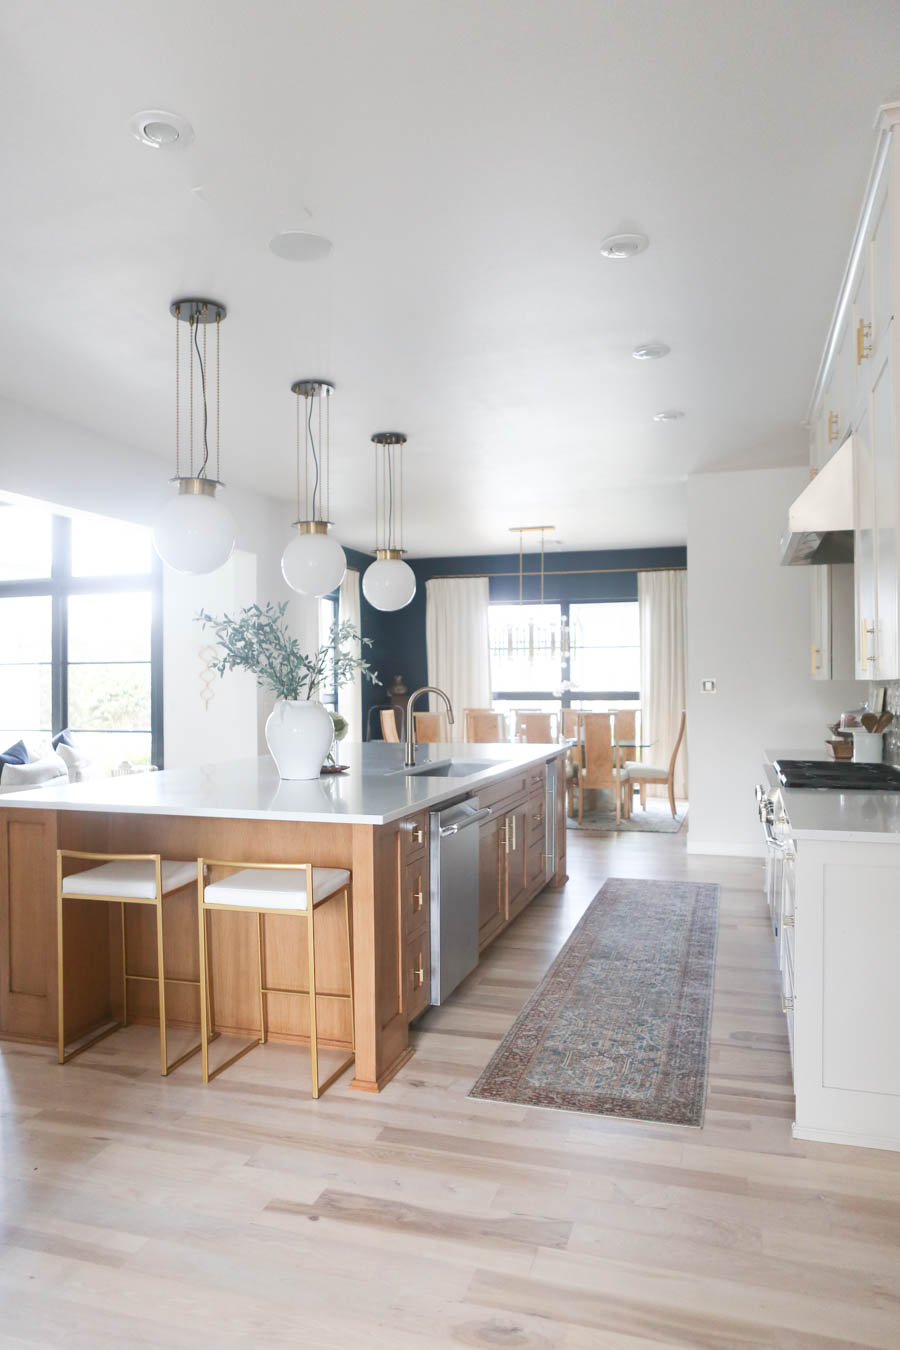 Cc And Mike Kitchen Remodel Reveal Large Natural Wood Island With